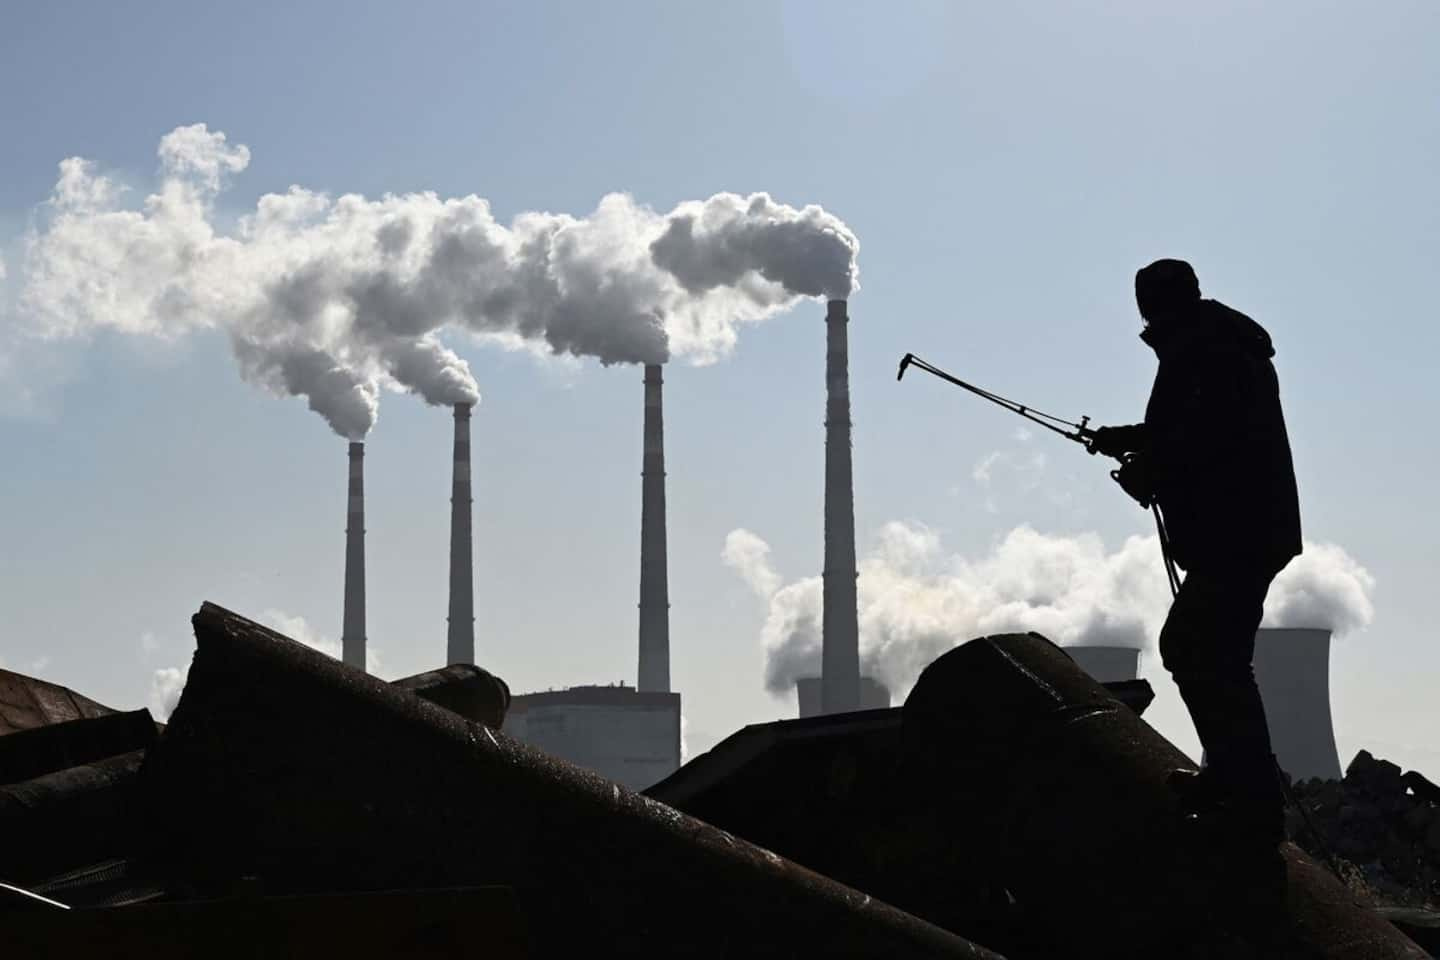 More and more coal-fired power plants in China, denounces Greenpeace